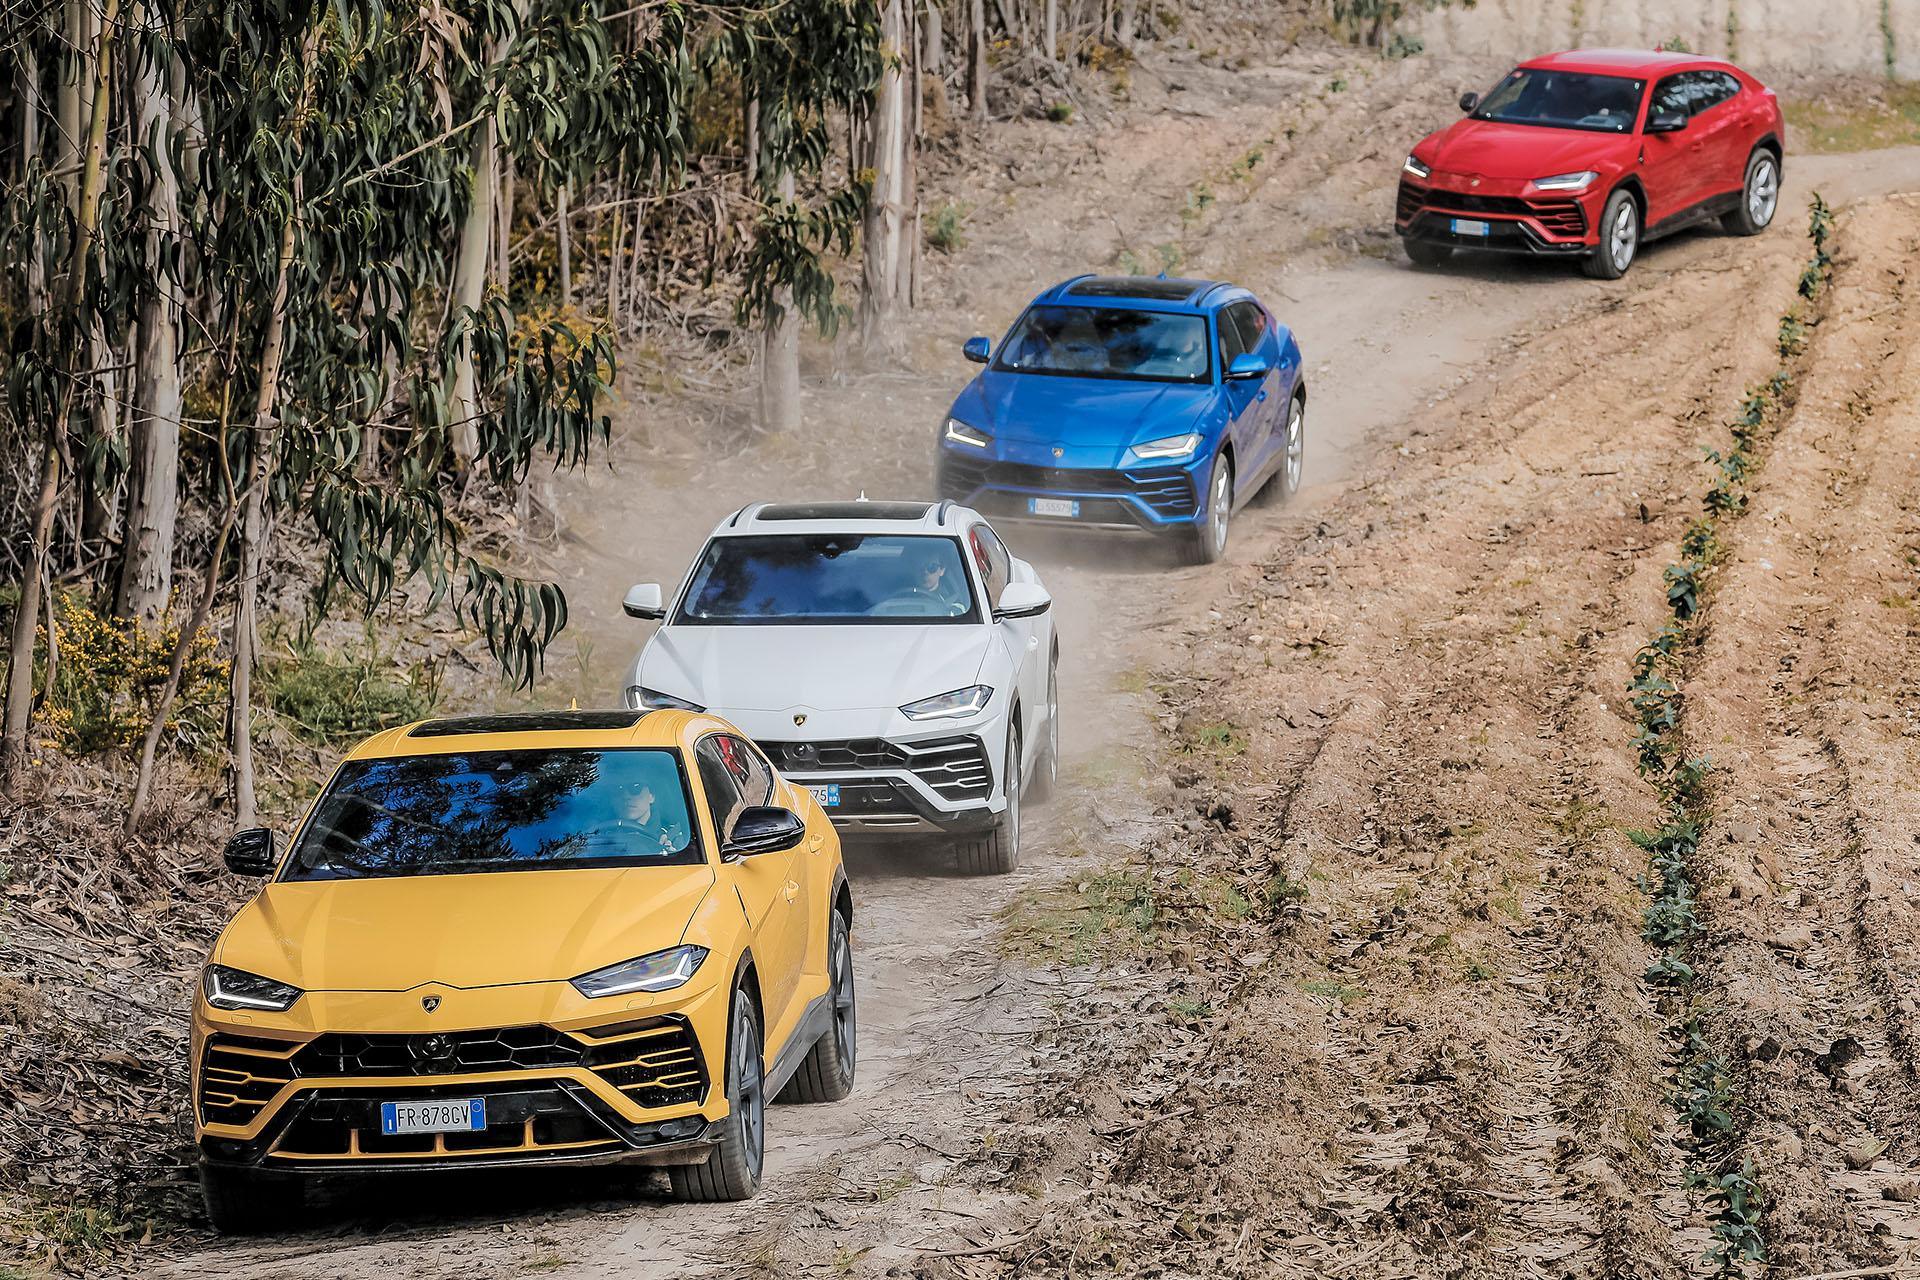 Best off-roading supercars